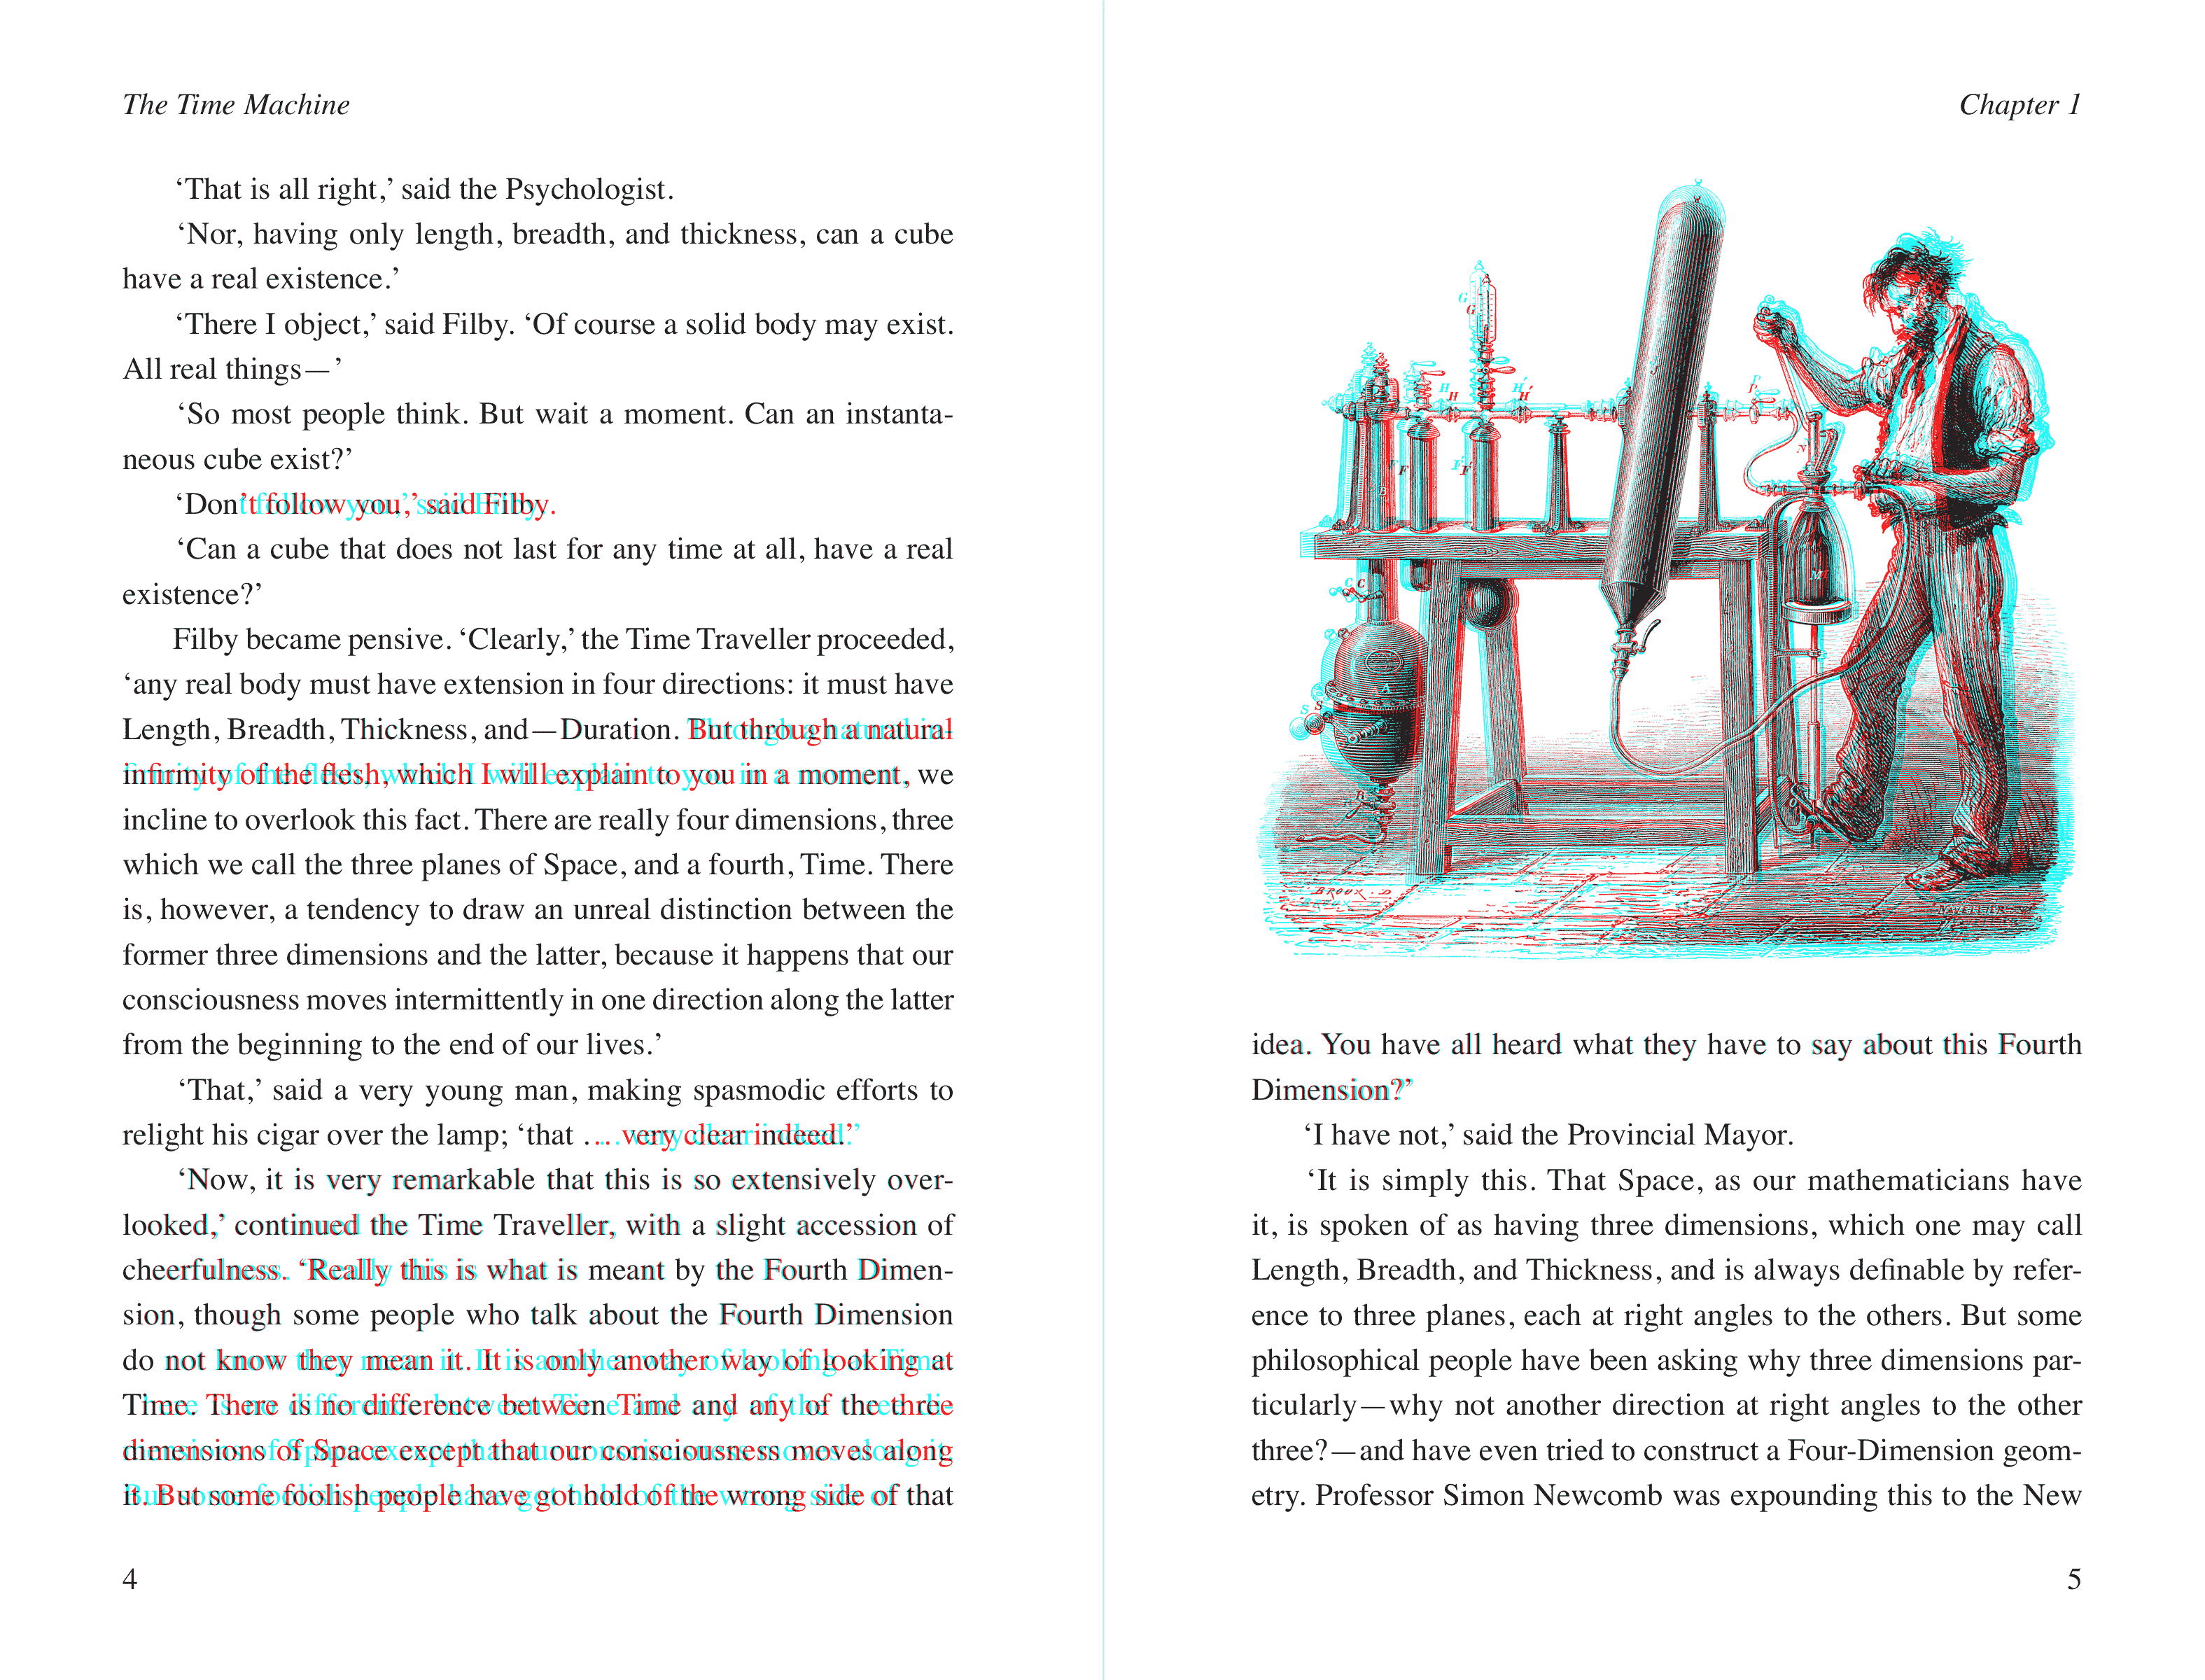 Comparison between two book pages.